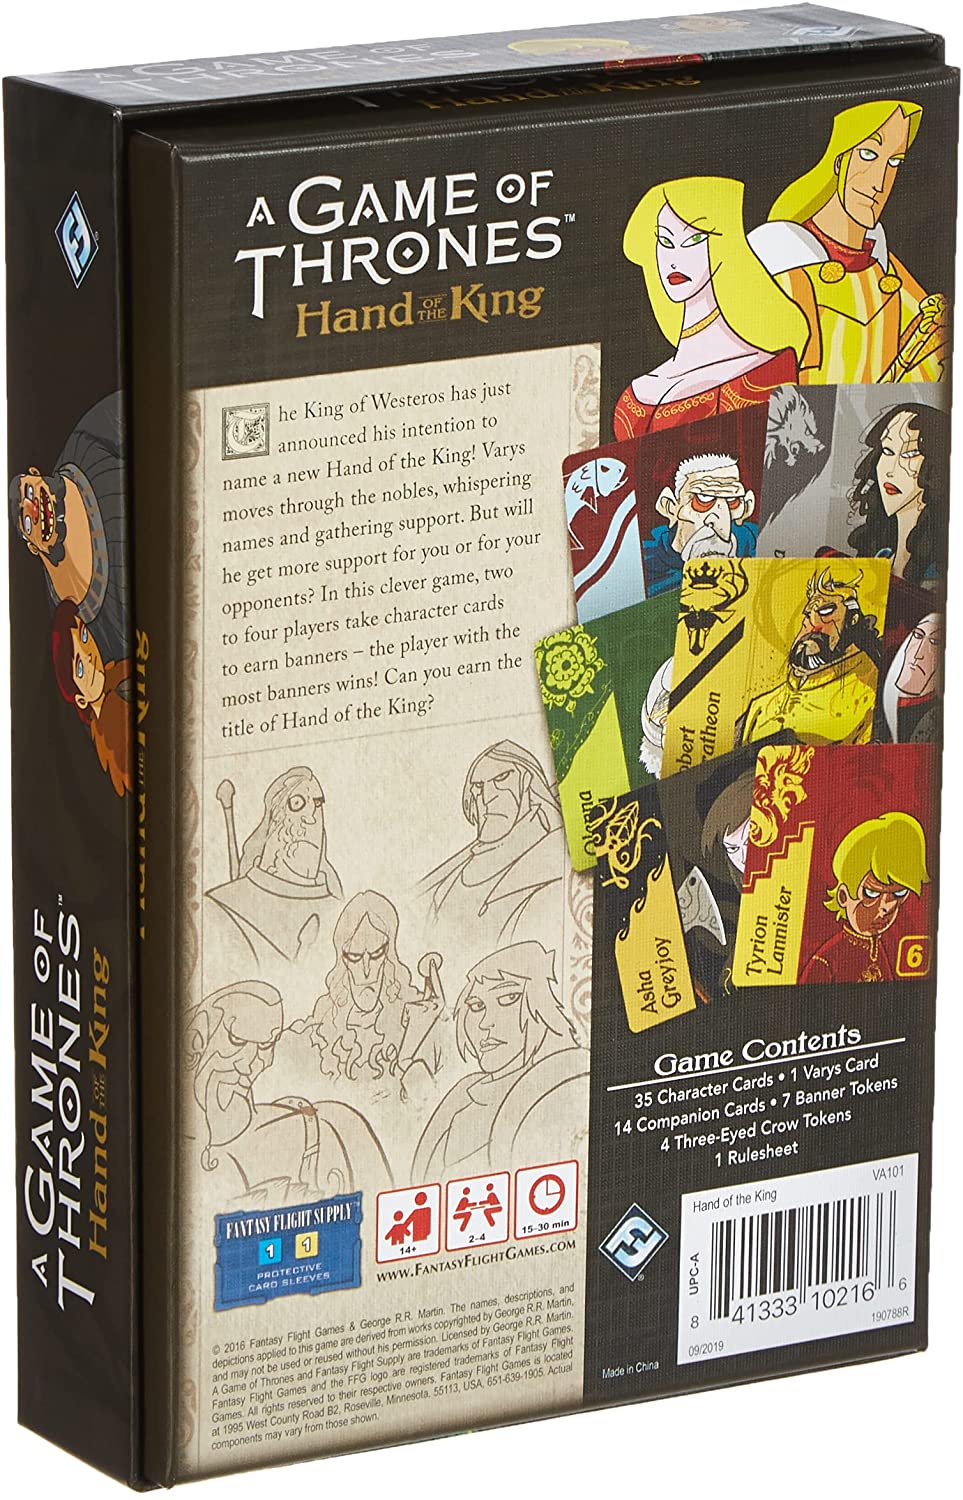 Fantasy Flight Games VA100 A Game of Thrones Hand of the King Card Game